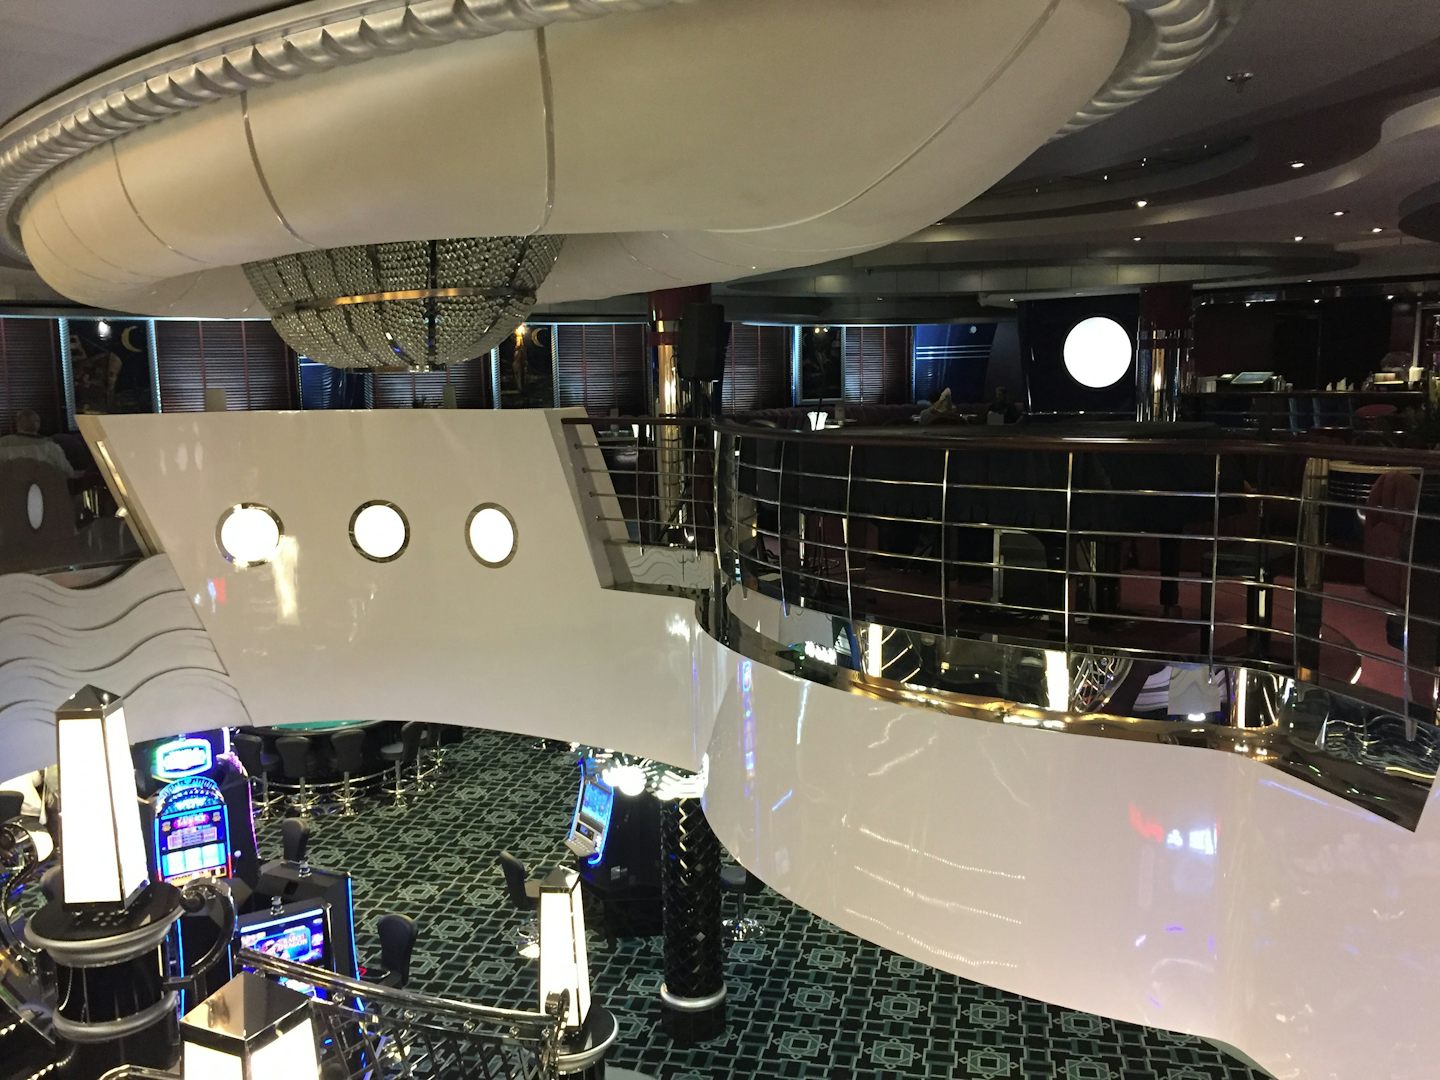 Large balcony of the lounge over the casino.